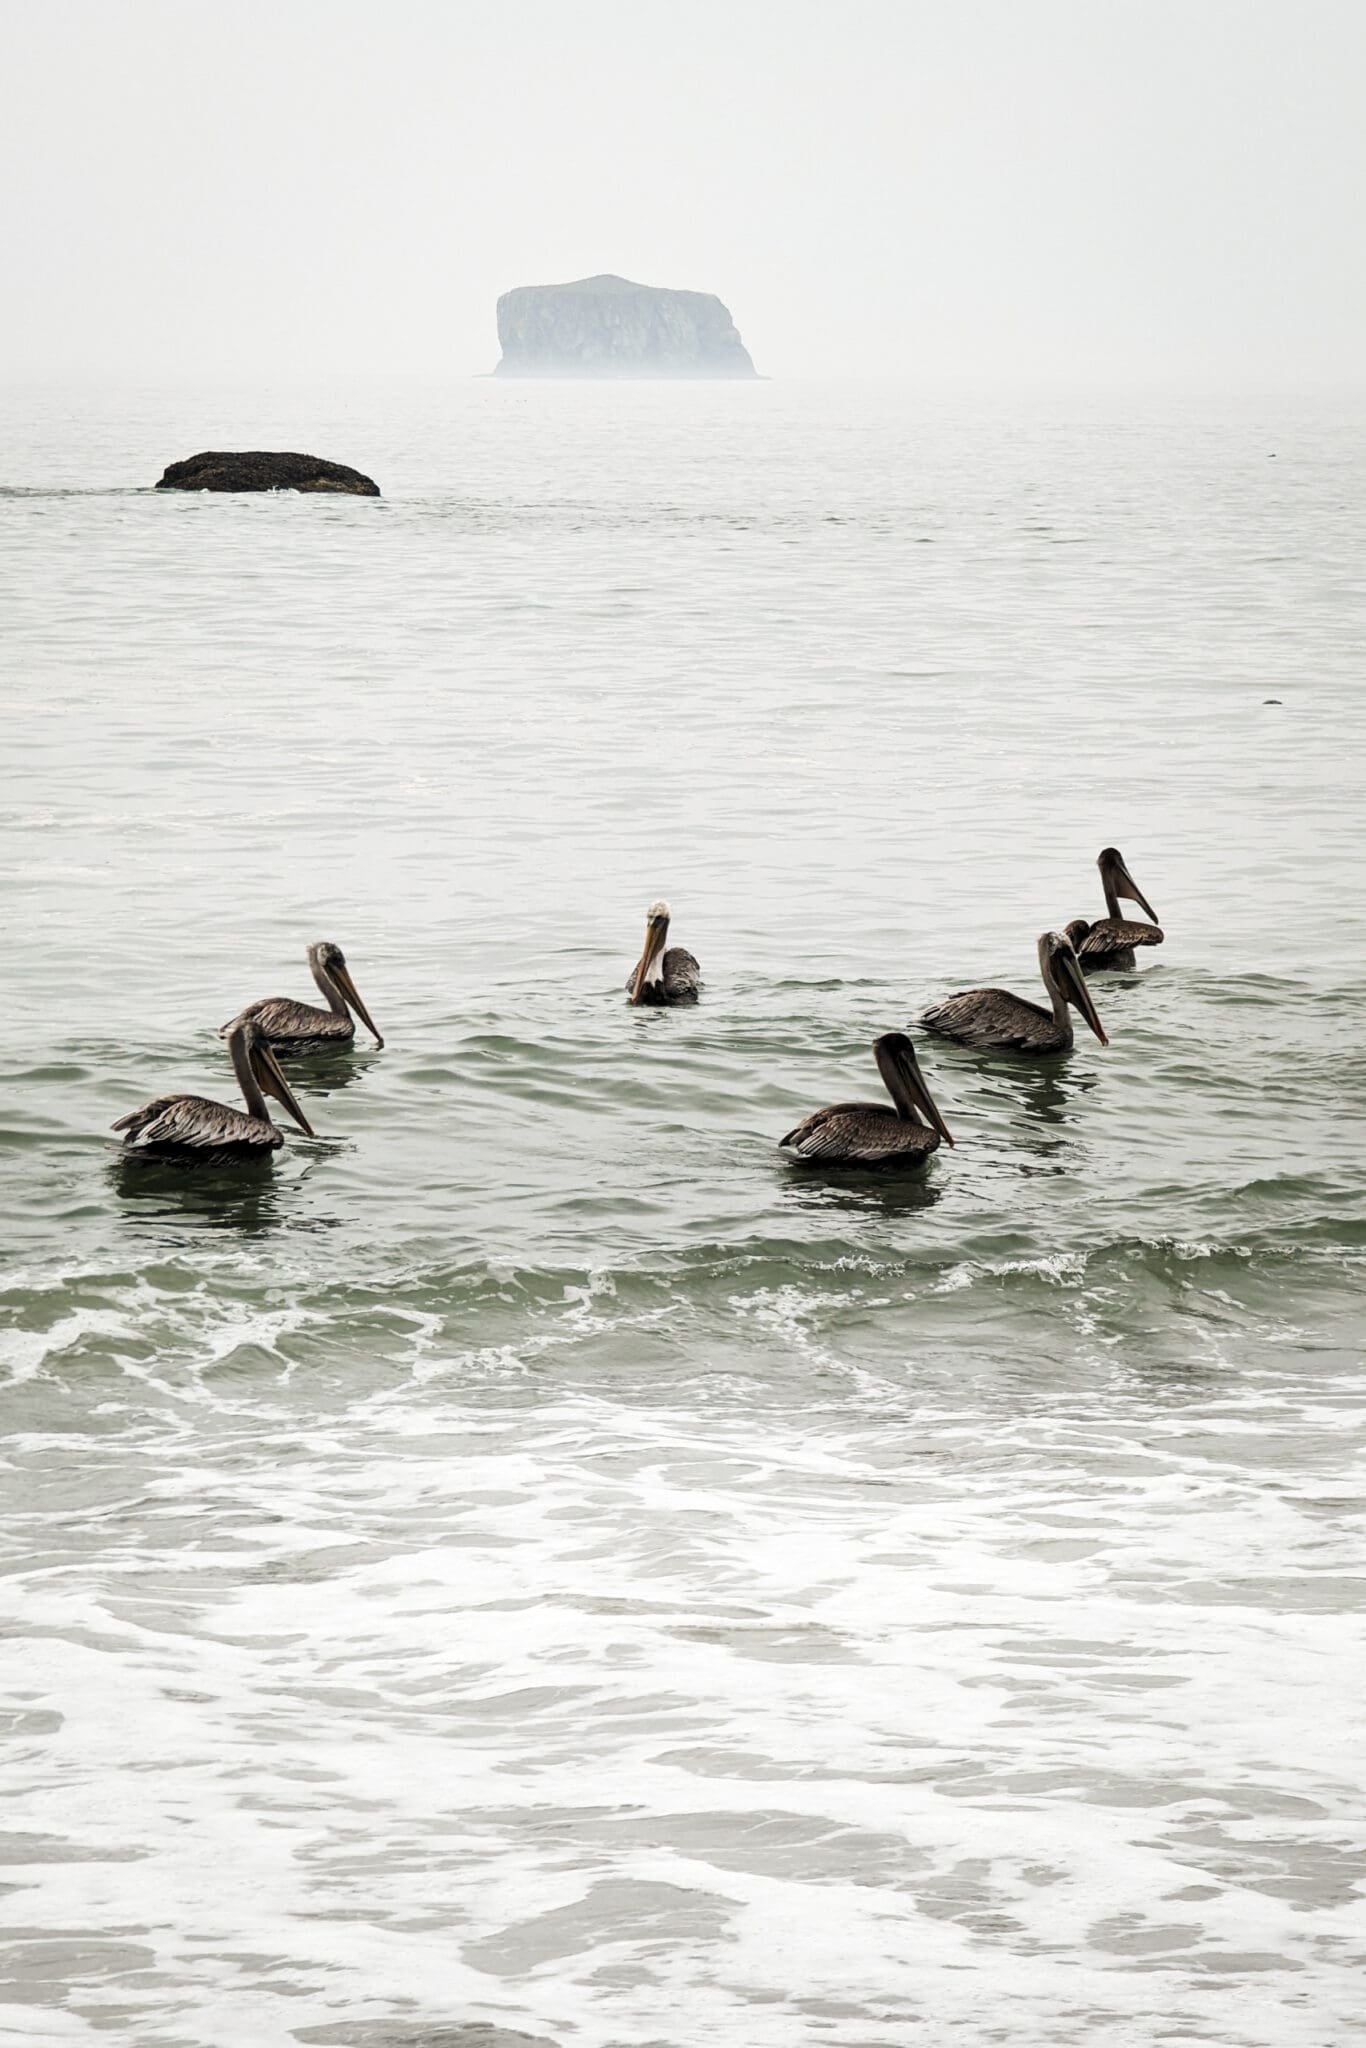 6 pelicans on the water